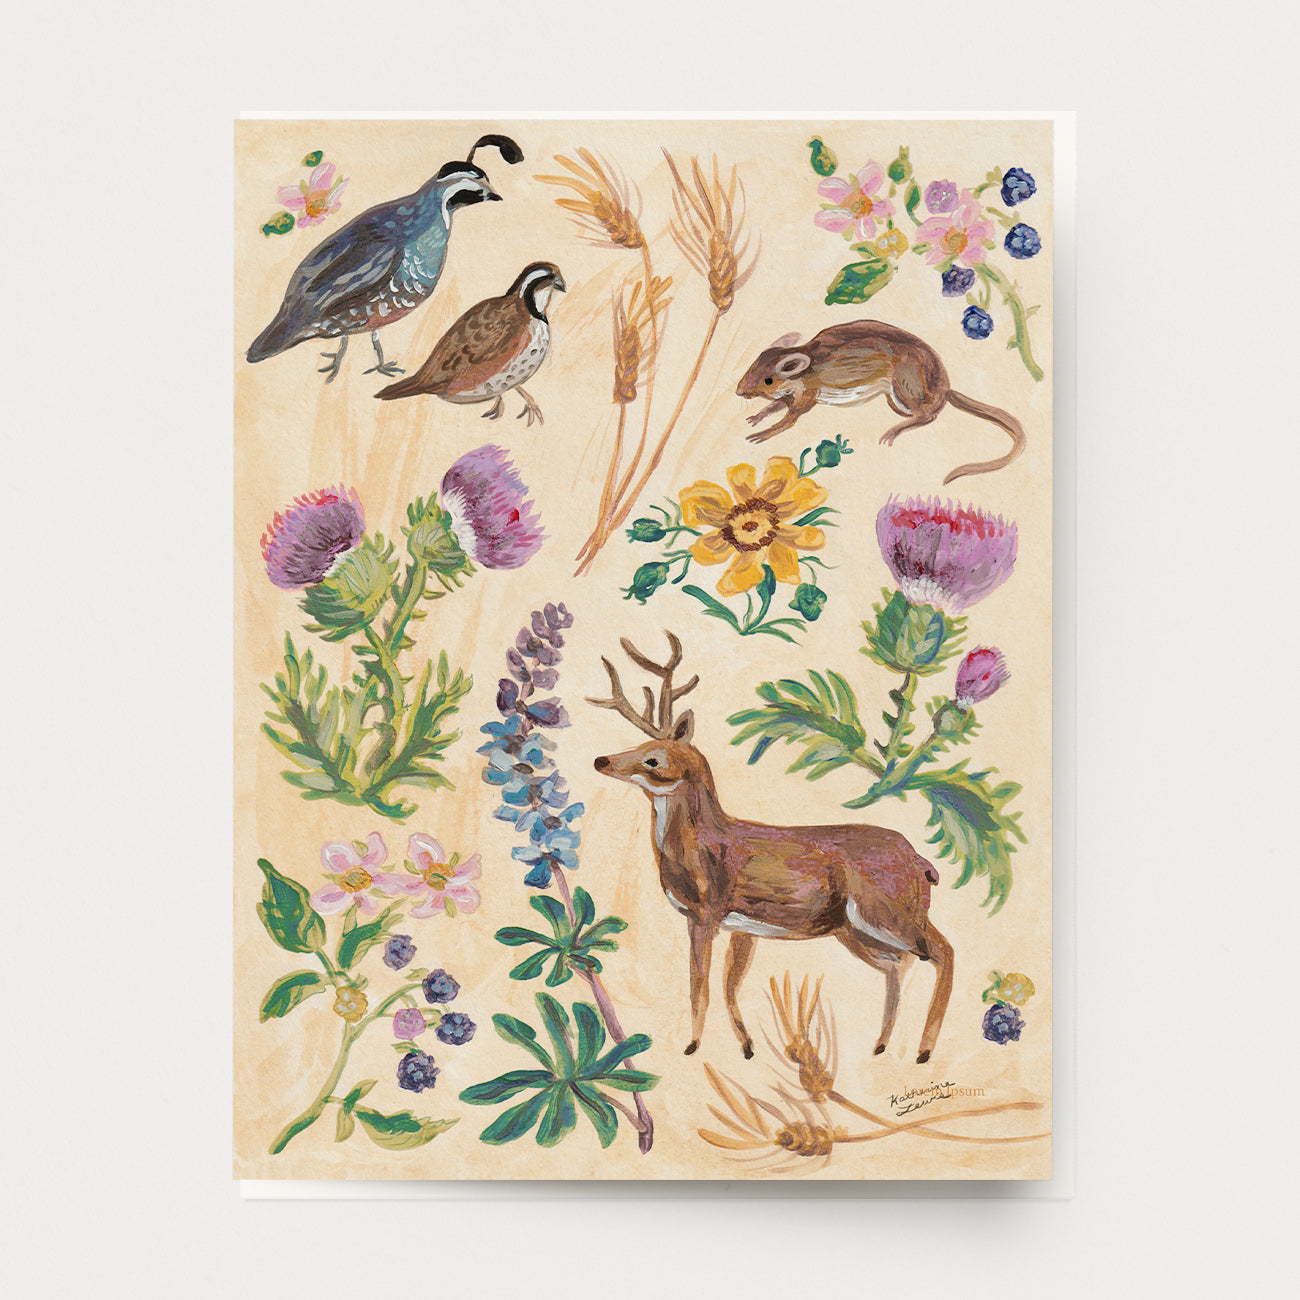 Greeting card of botanical studies of field flora and fauna: deer, quail, mice, thistle, blackberry, lupine and rose. Ingrid Press, made in the USA.